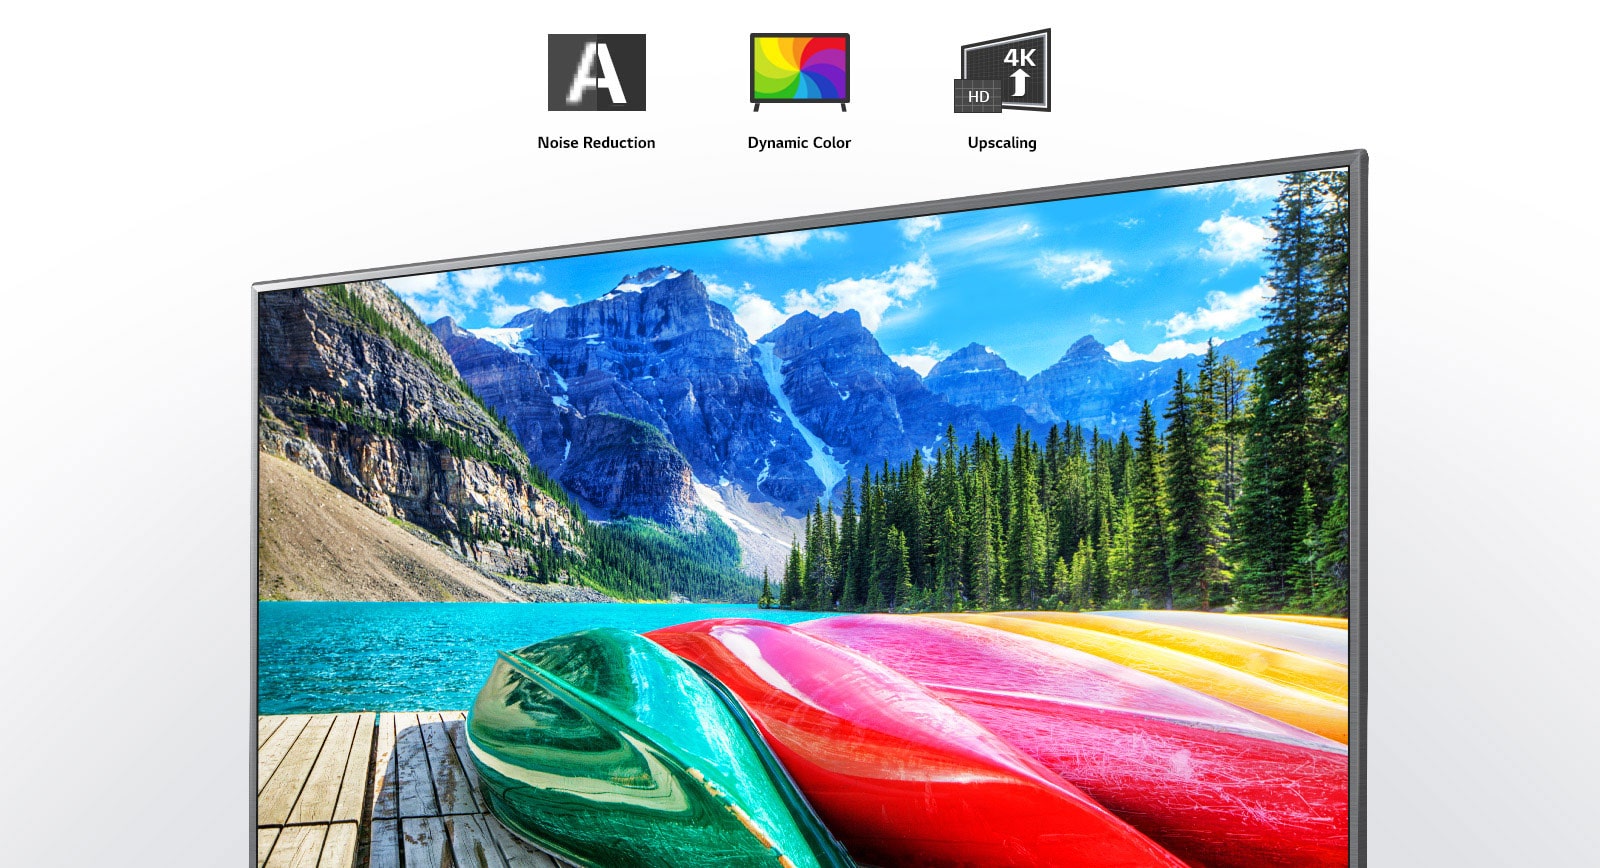 Noise reduction, dynamic color, and upscaling icons and a TV screen showing a scenic shot of mountains, forest, and a lake.